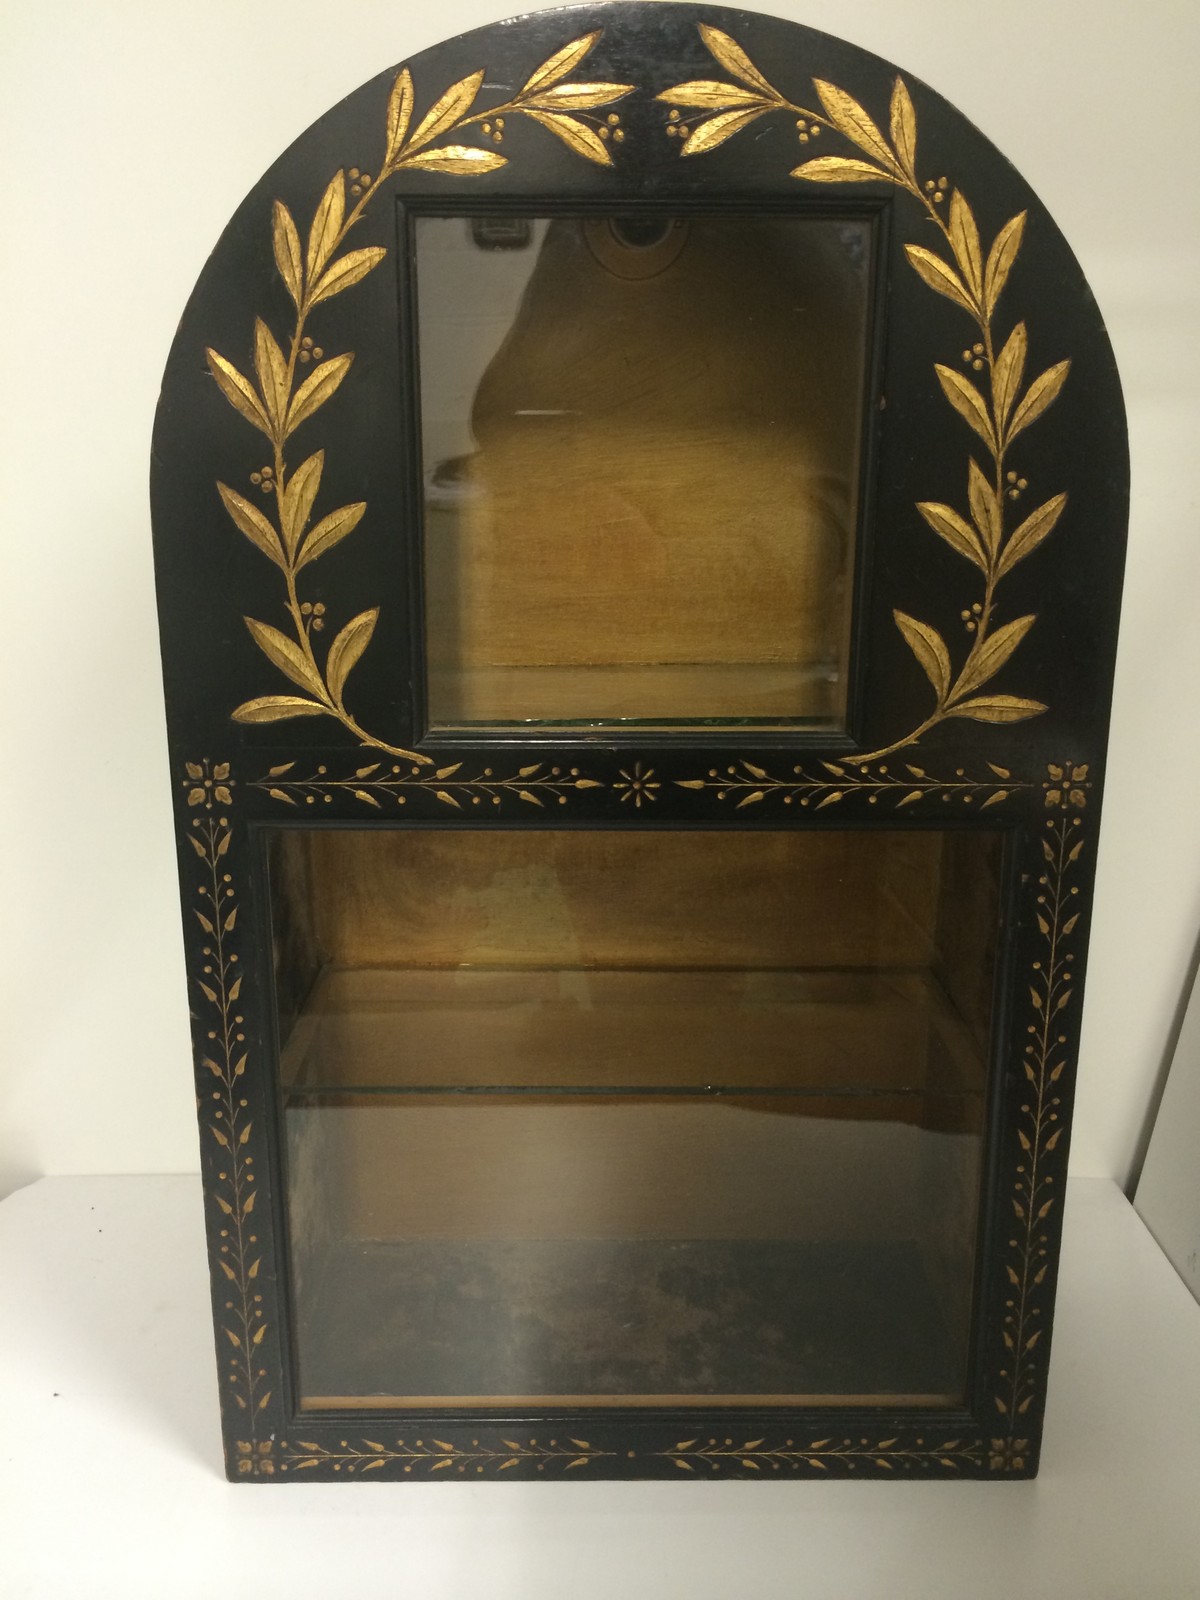 A lovely display cabinet with back light and glass shelf